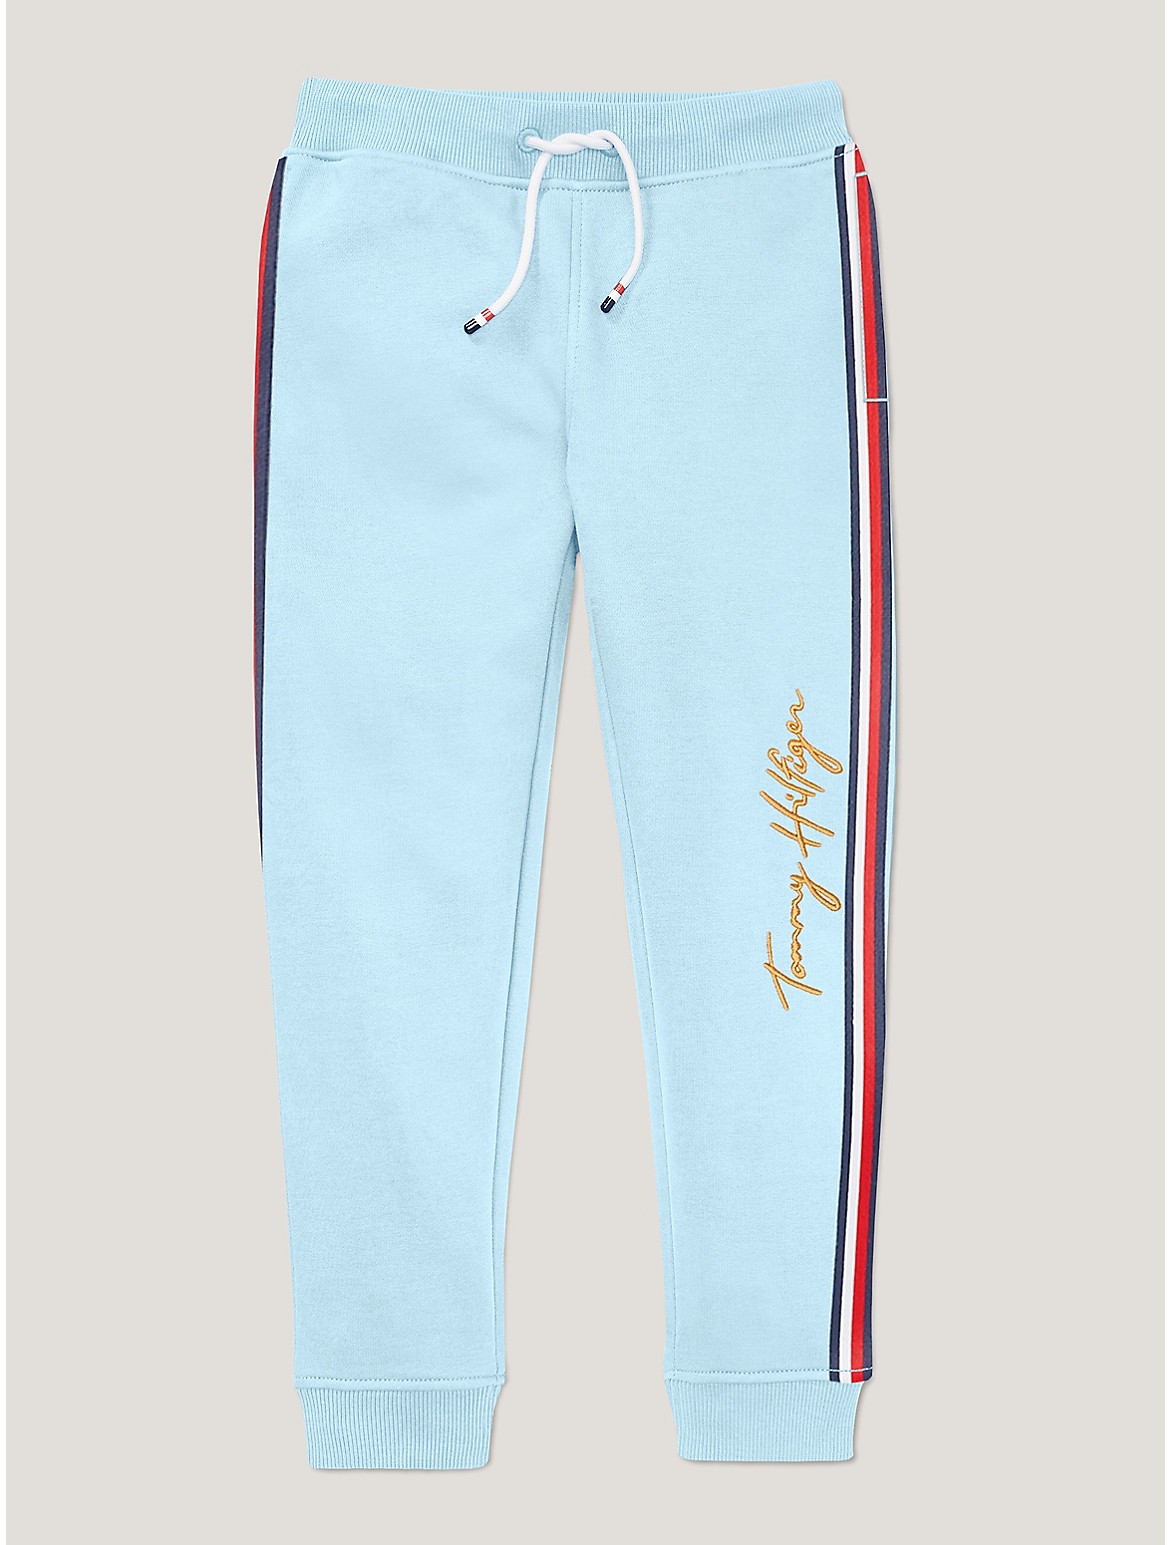 Tommy Hilfiger Boys' Kids' Embroidered Signature Jogger - Blue - S